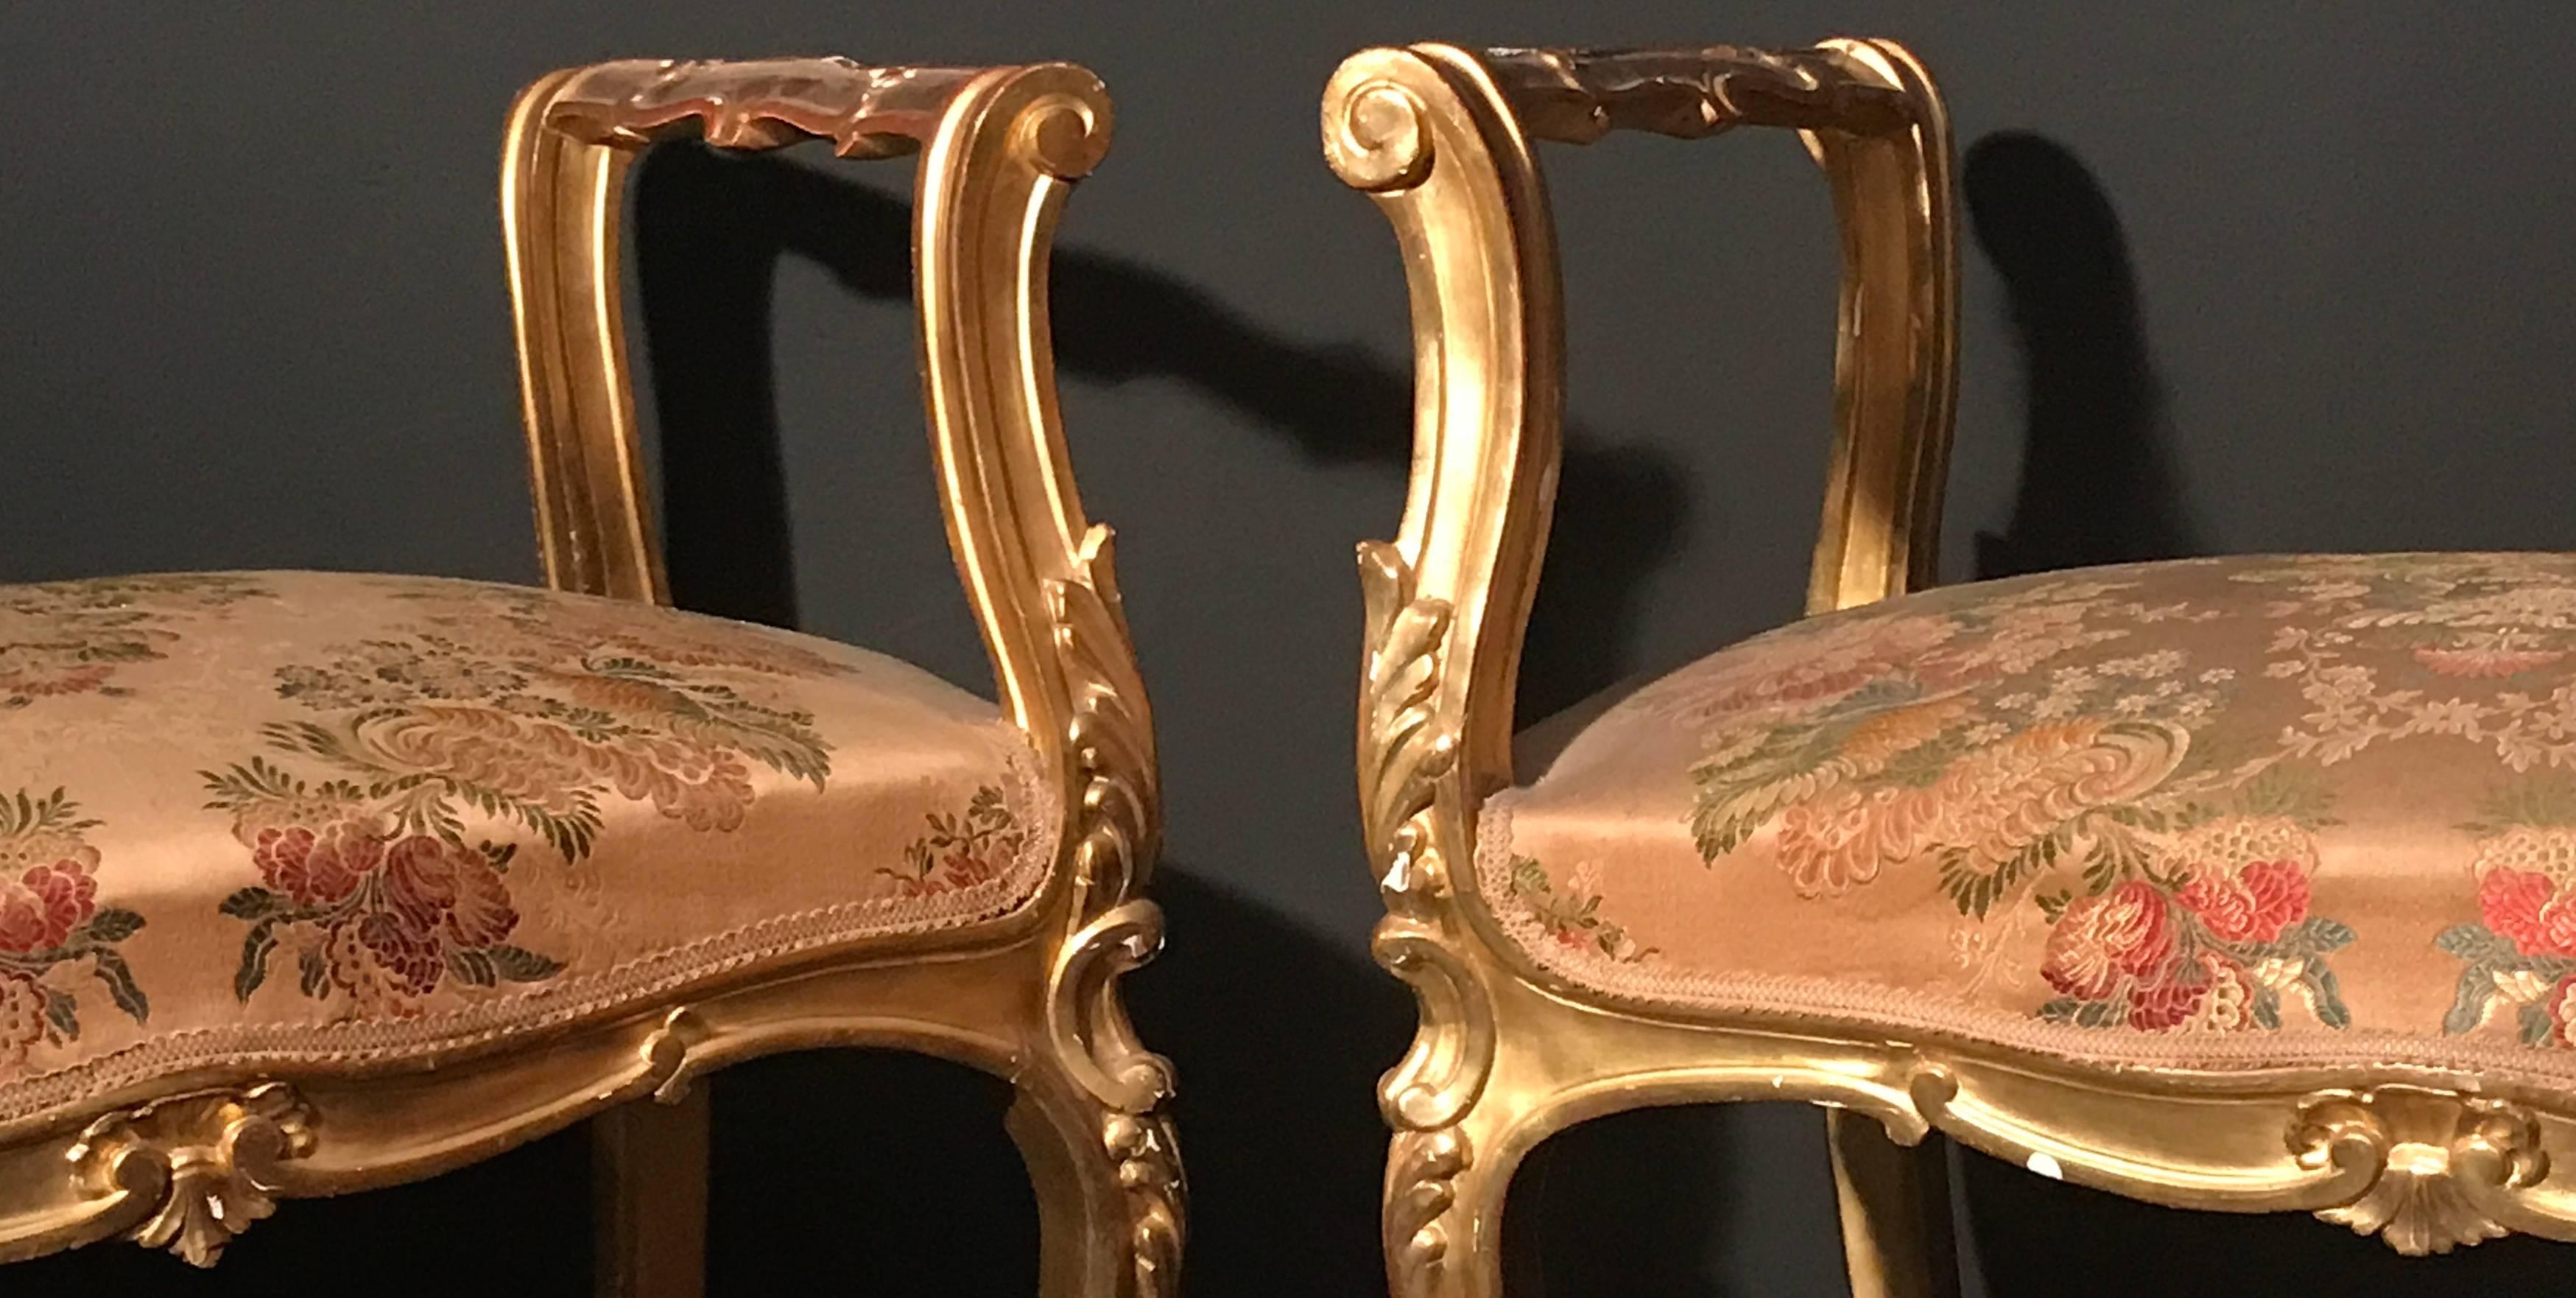 Giltwood Pair of 19th Century Italian Window Benches or Settees